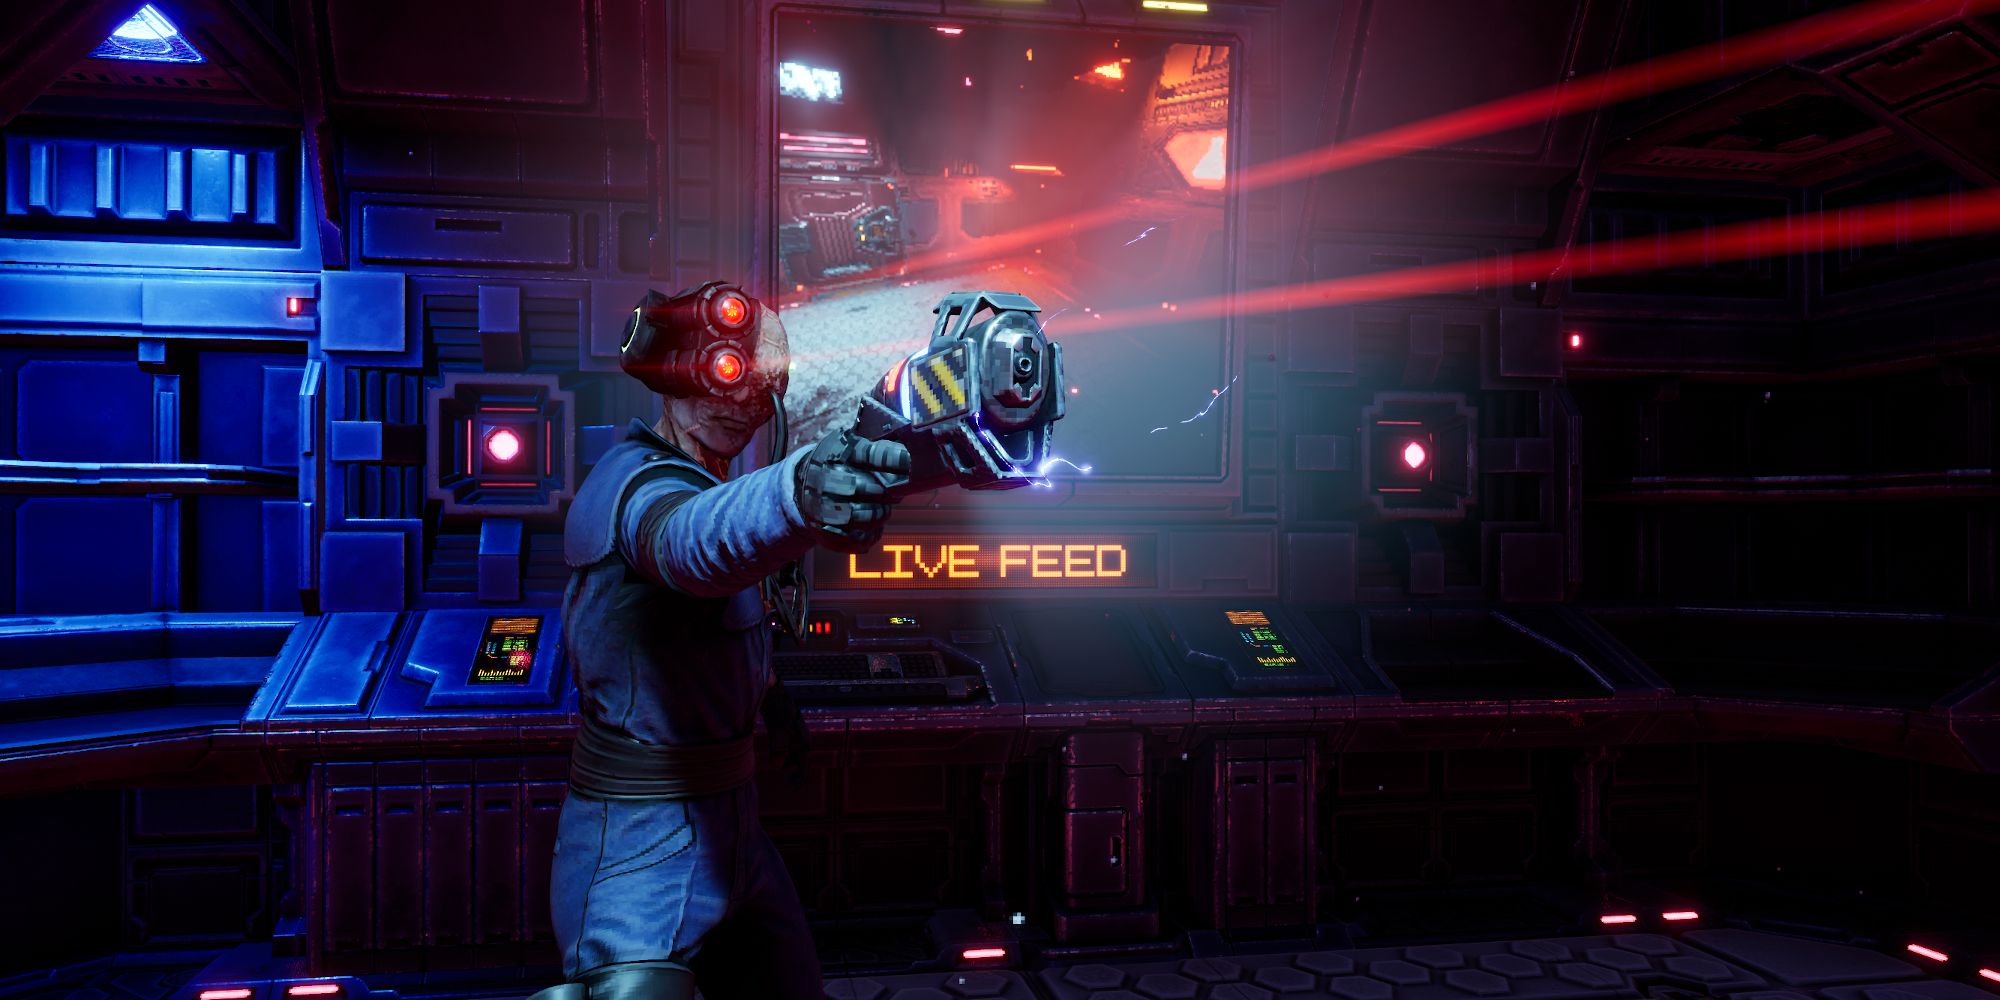 Screenshot from System Shock remake shows a cyborg with two large red metal eyes on one side of it's head and a human face holding a pistol towards the right side of the screen with a metal console and large screen above it.